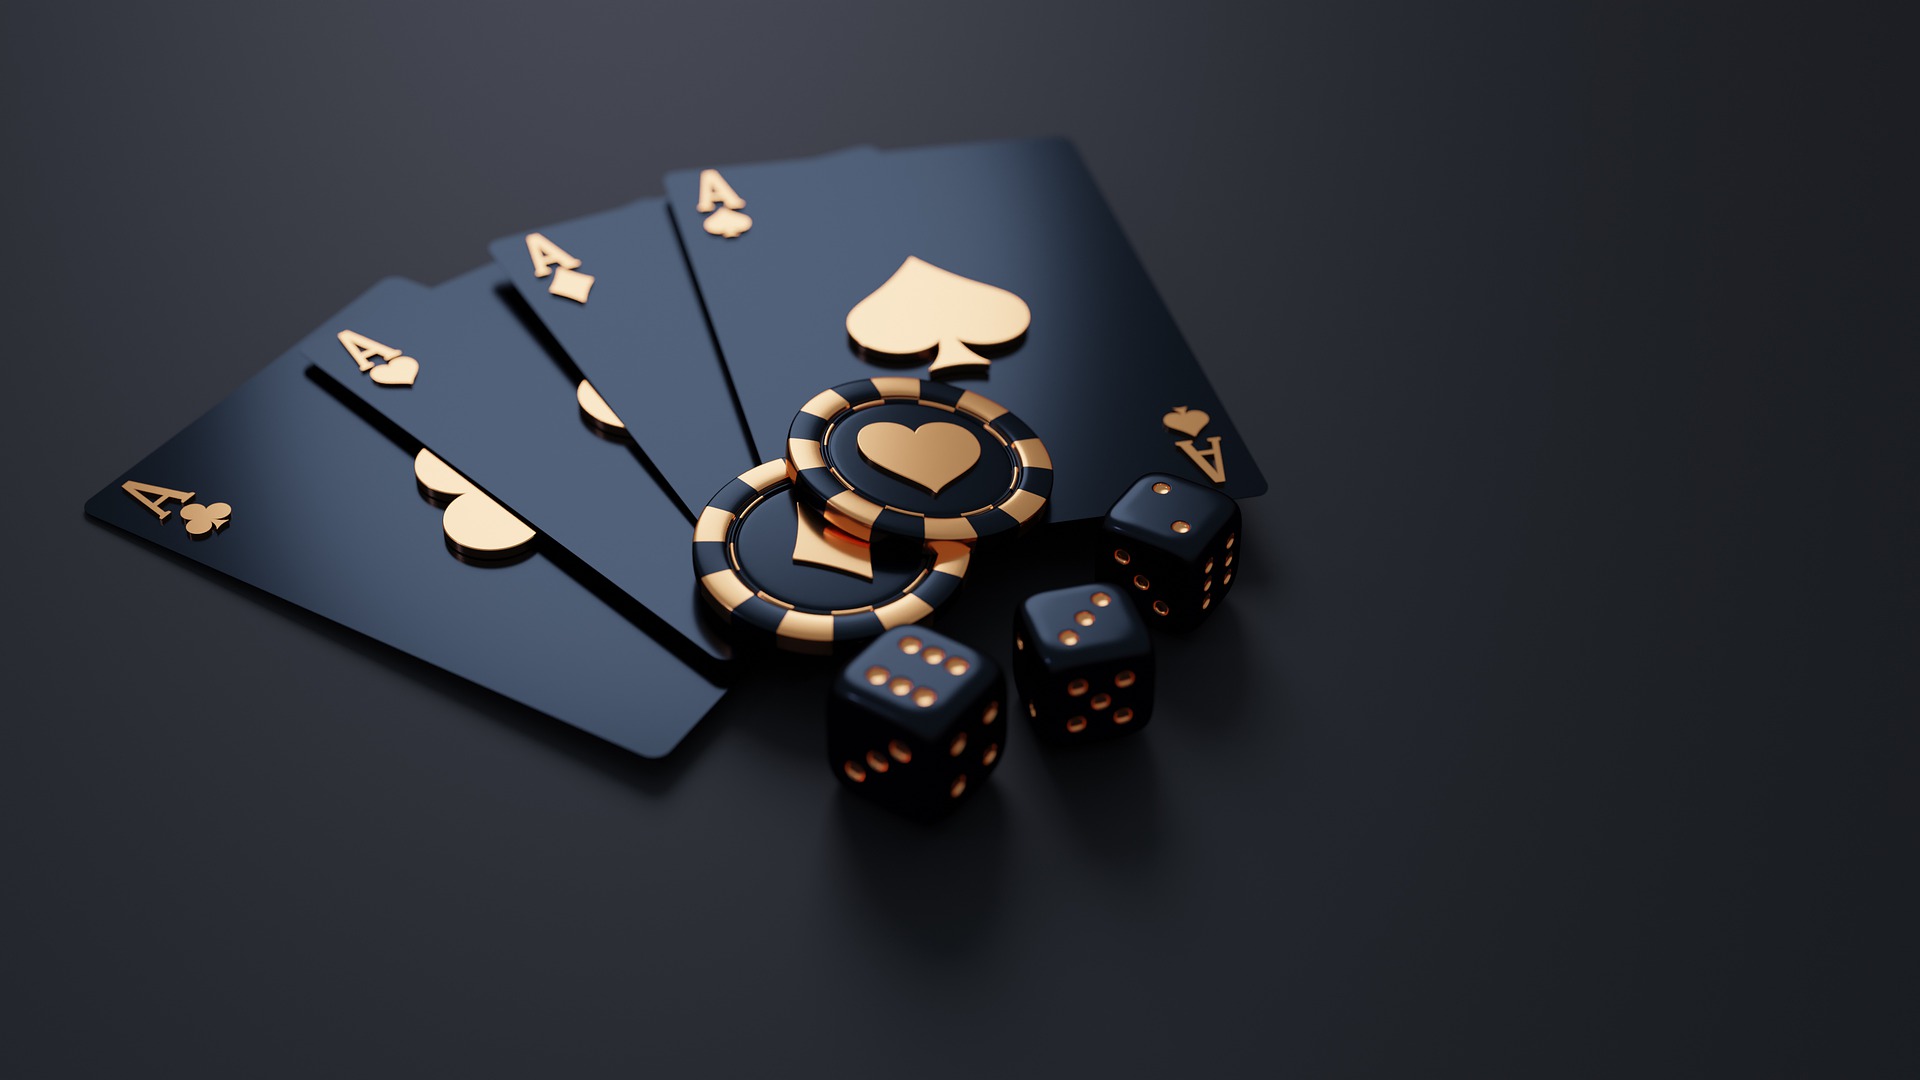 4 a kind in poker with casino chips and dice